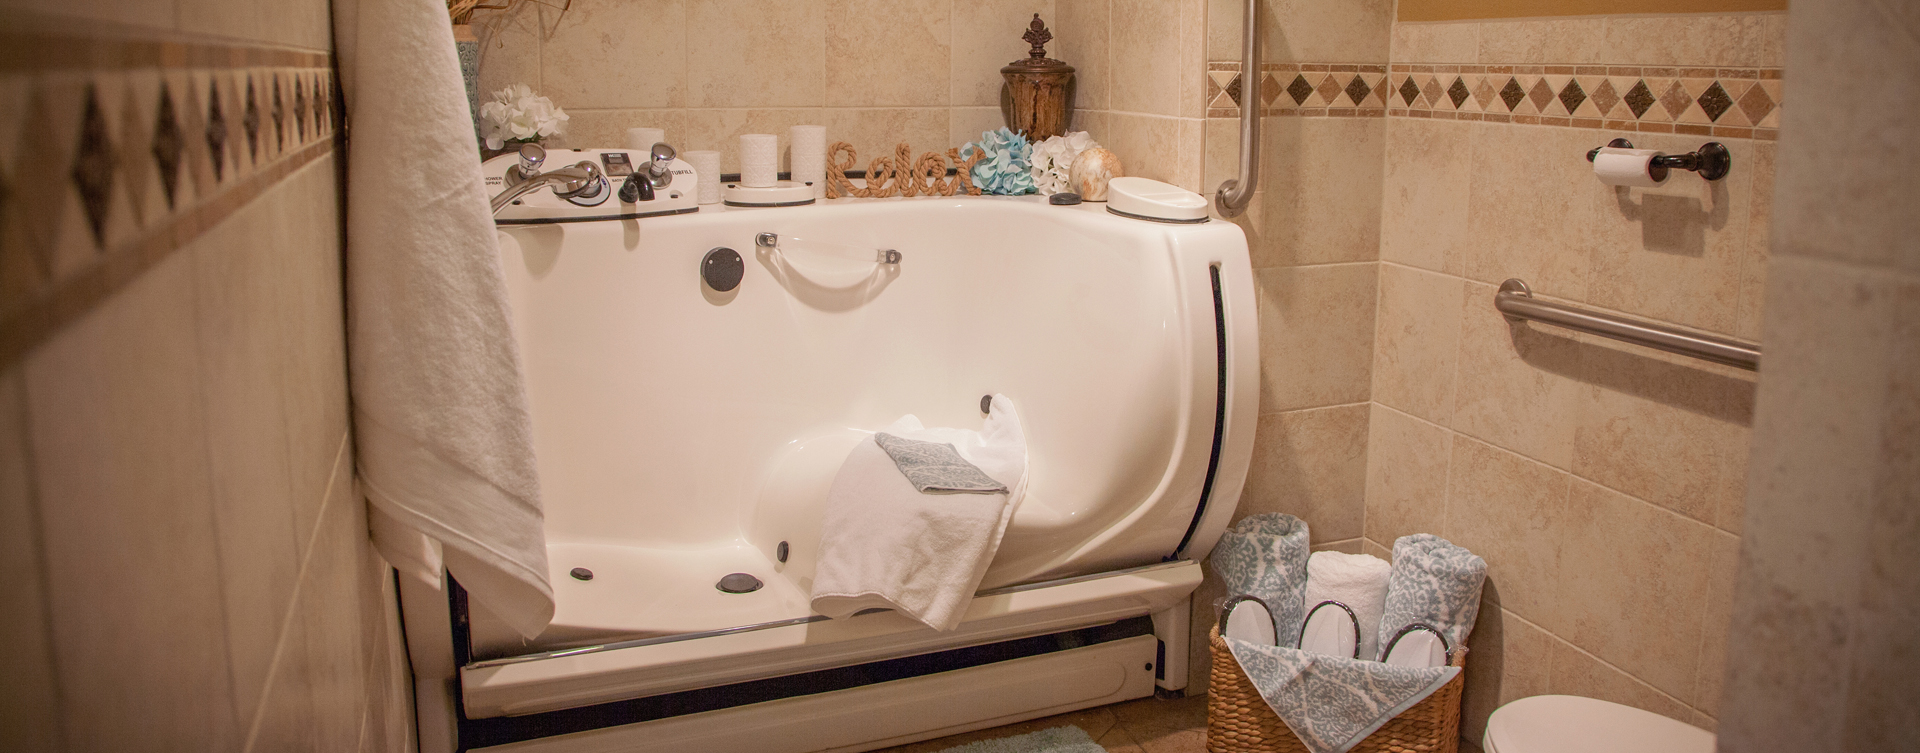 With an easy access design, our whirlpool allows you to enjoy a warm bath safely and comfortably at Bickford of Marion